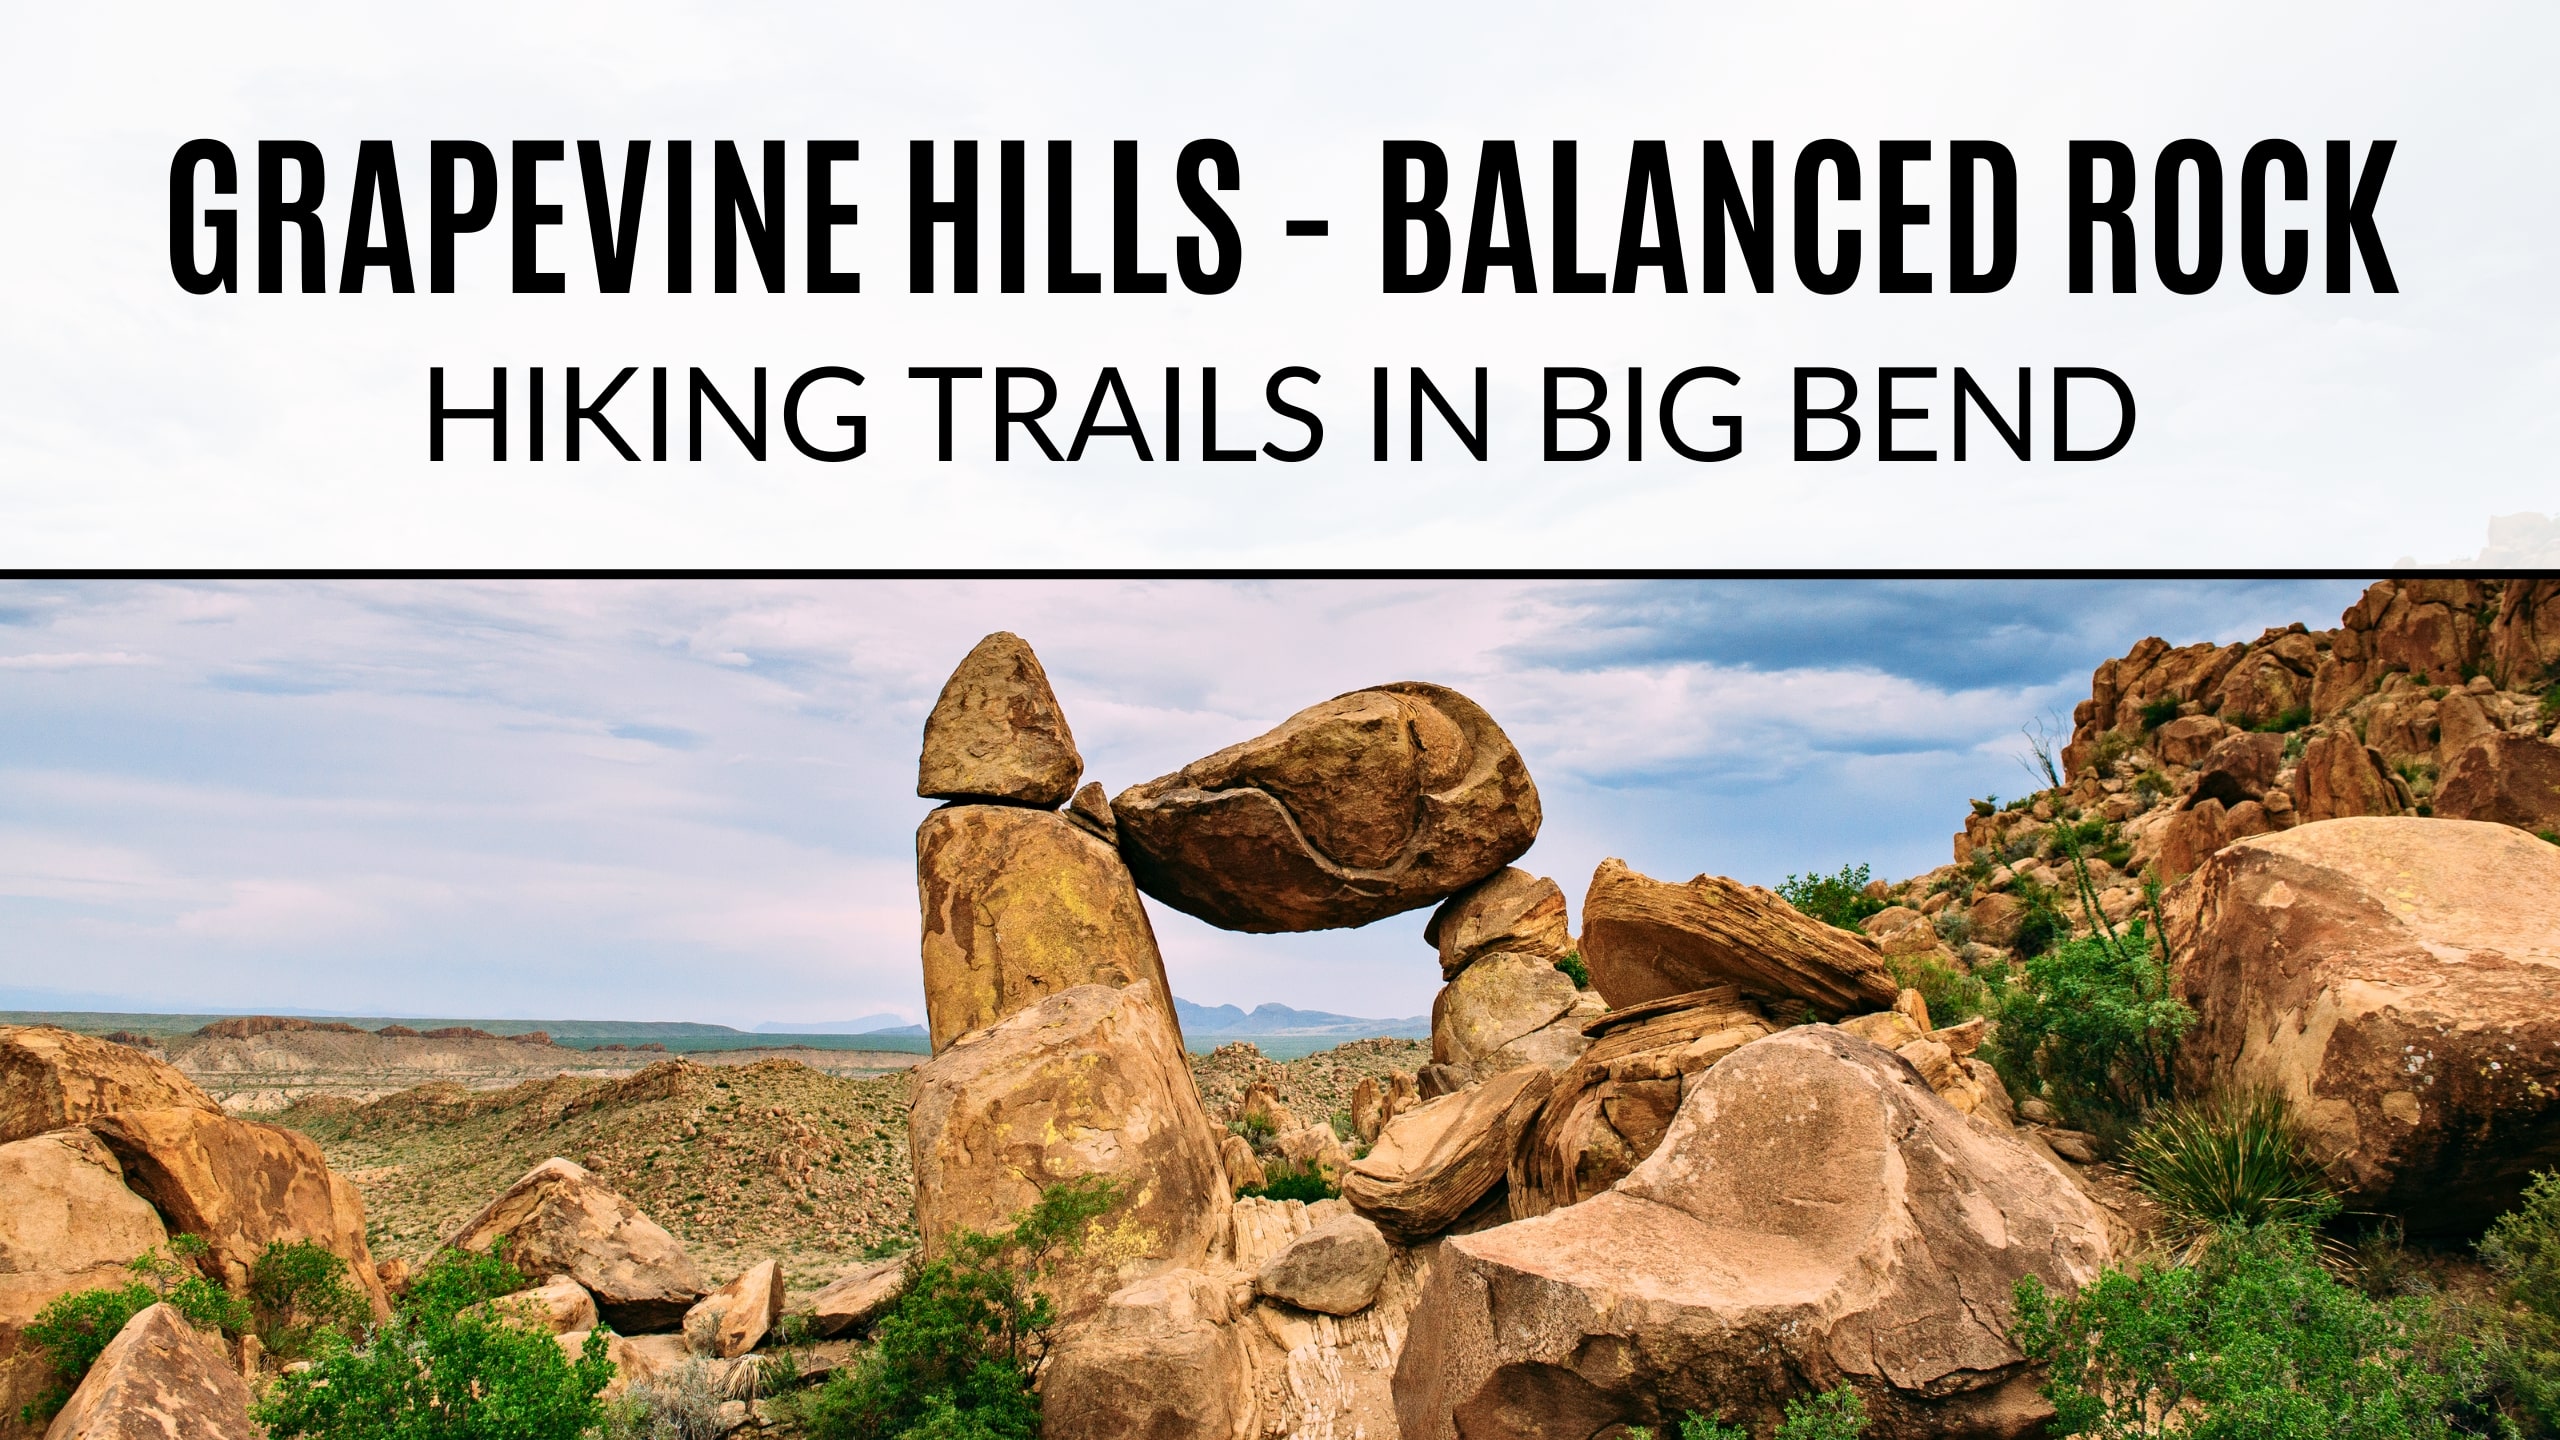 Balanced Rock at the end of Grapevine Hills Trail. Text on the image says "Grapevine Hills - Balanced Rock. Hiking Trails in Big Bend".